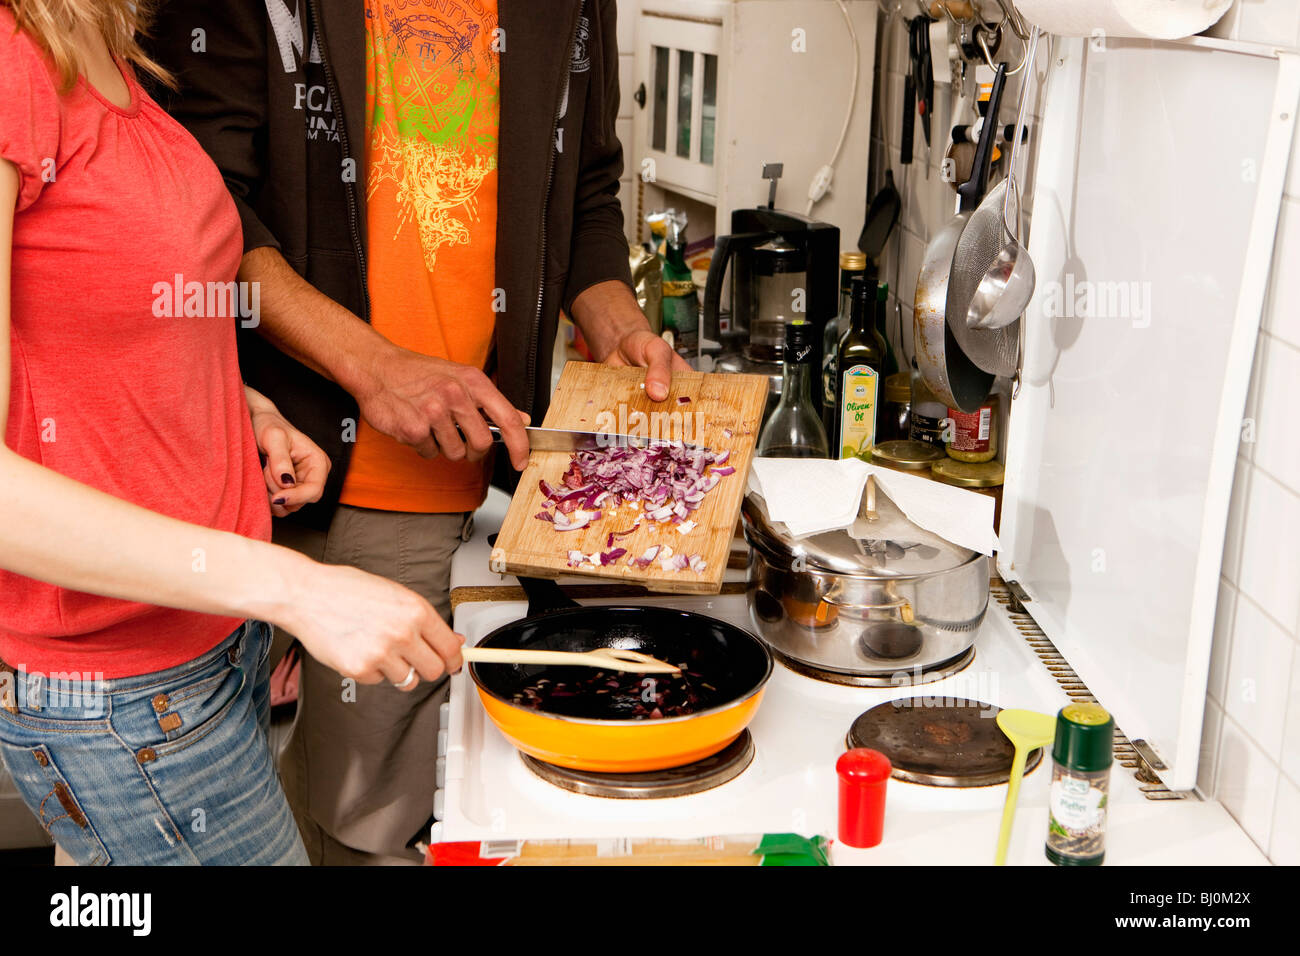 detail of young couple cooking together in kitchen Stock Photo